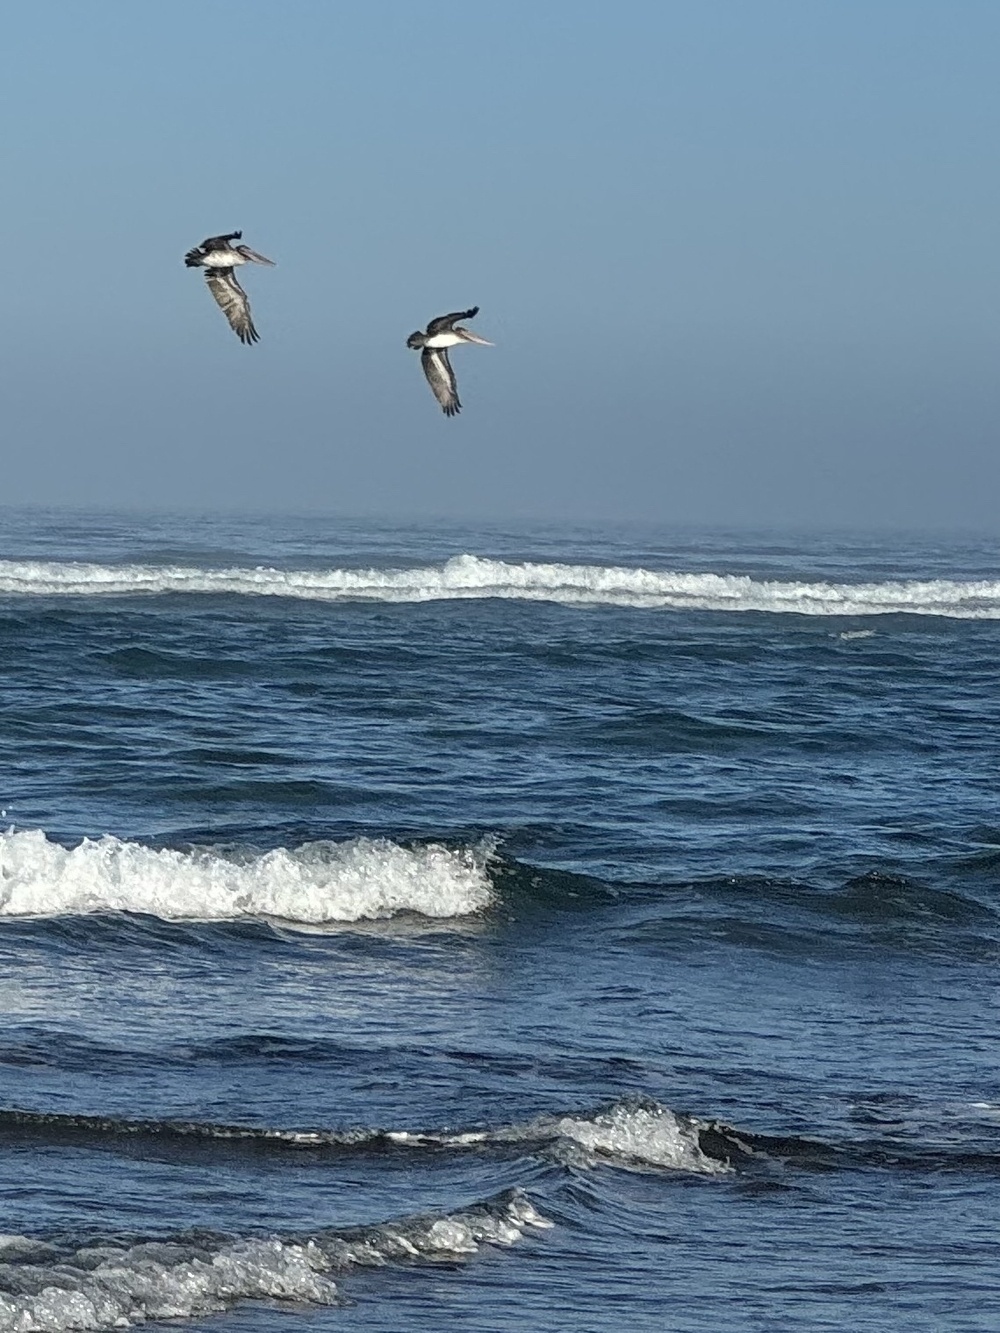 Two pelicans in flight over the waves. 